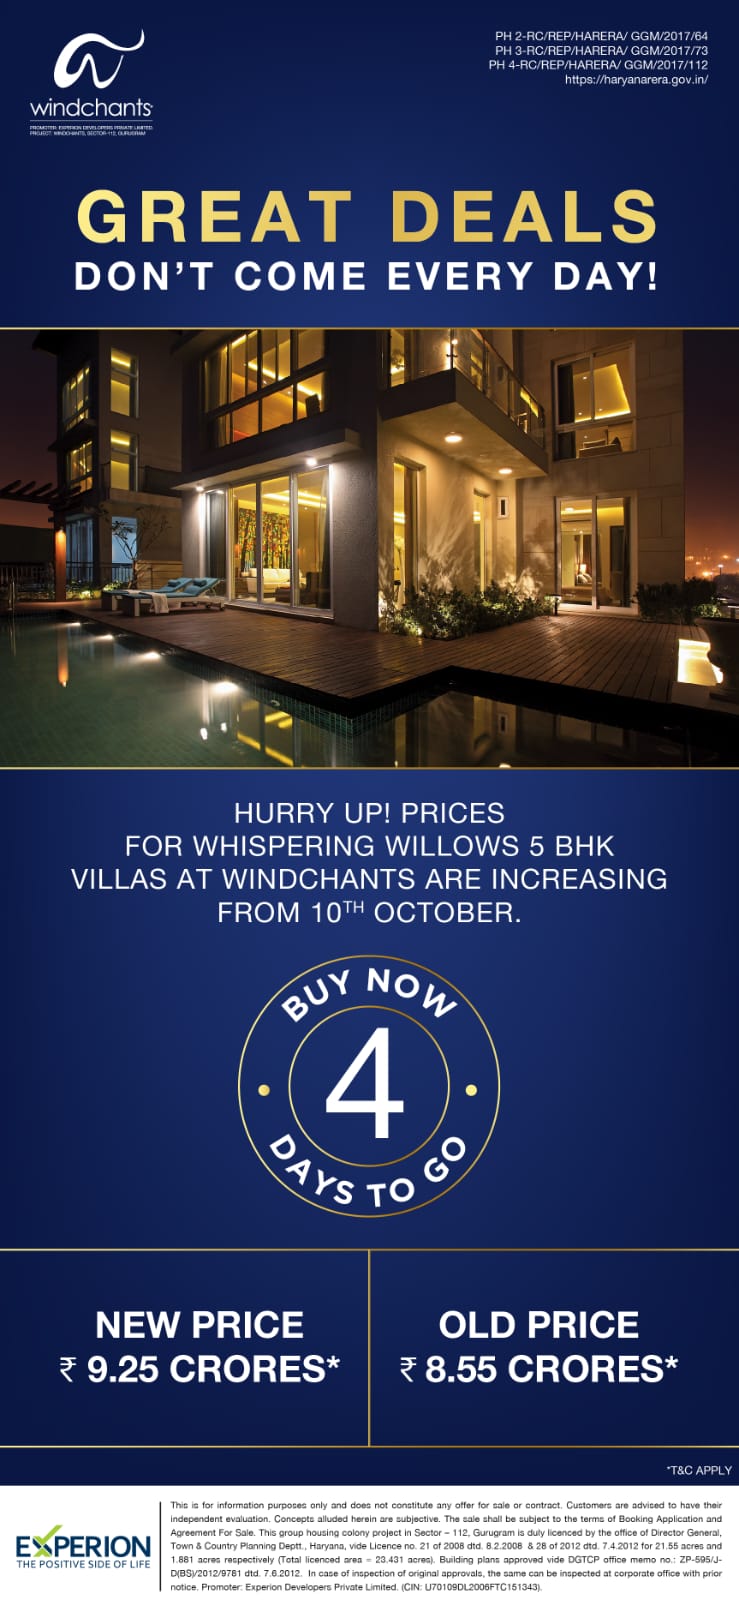 Hurry up prices for whispering willows 5 BHK villas at Experion Windchants are increasing from 10th October.